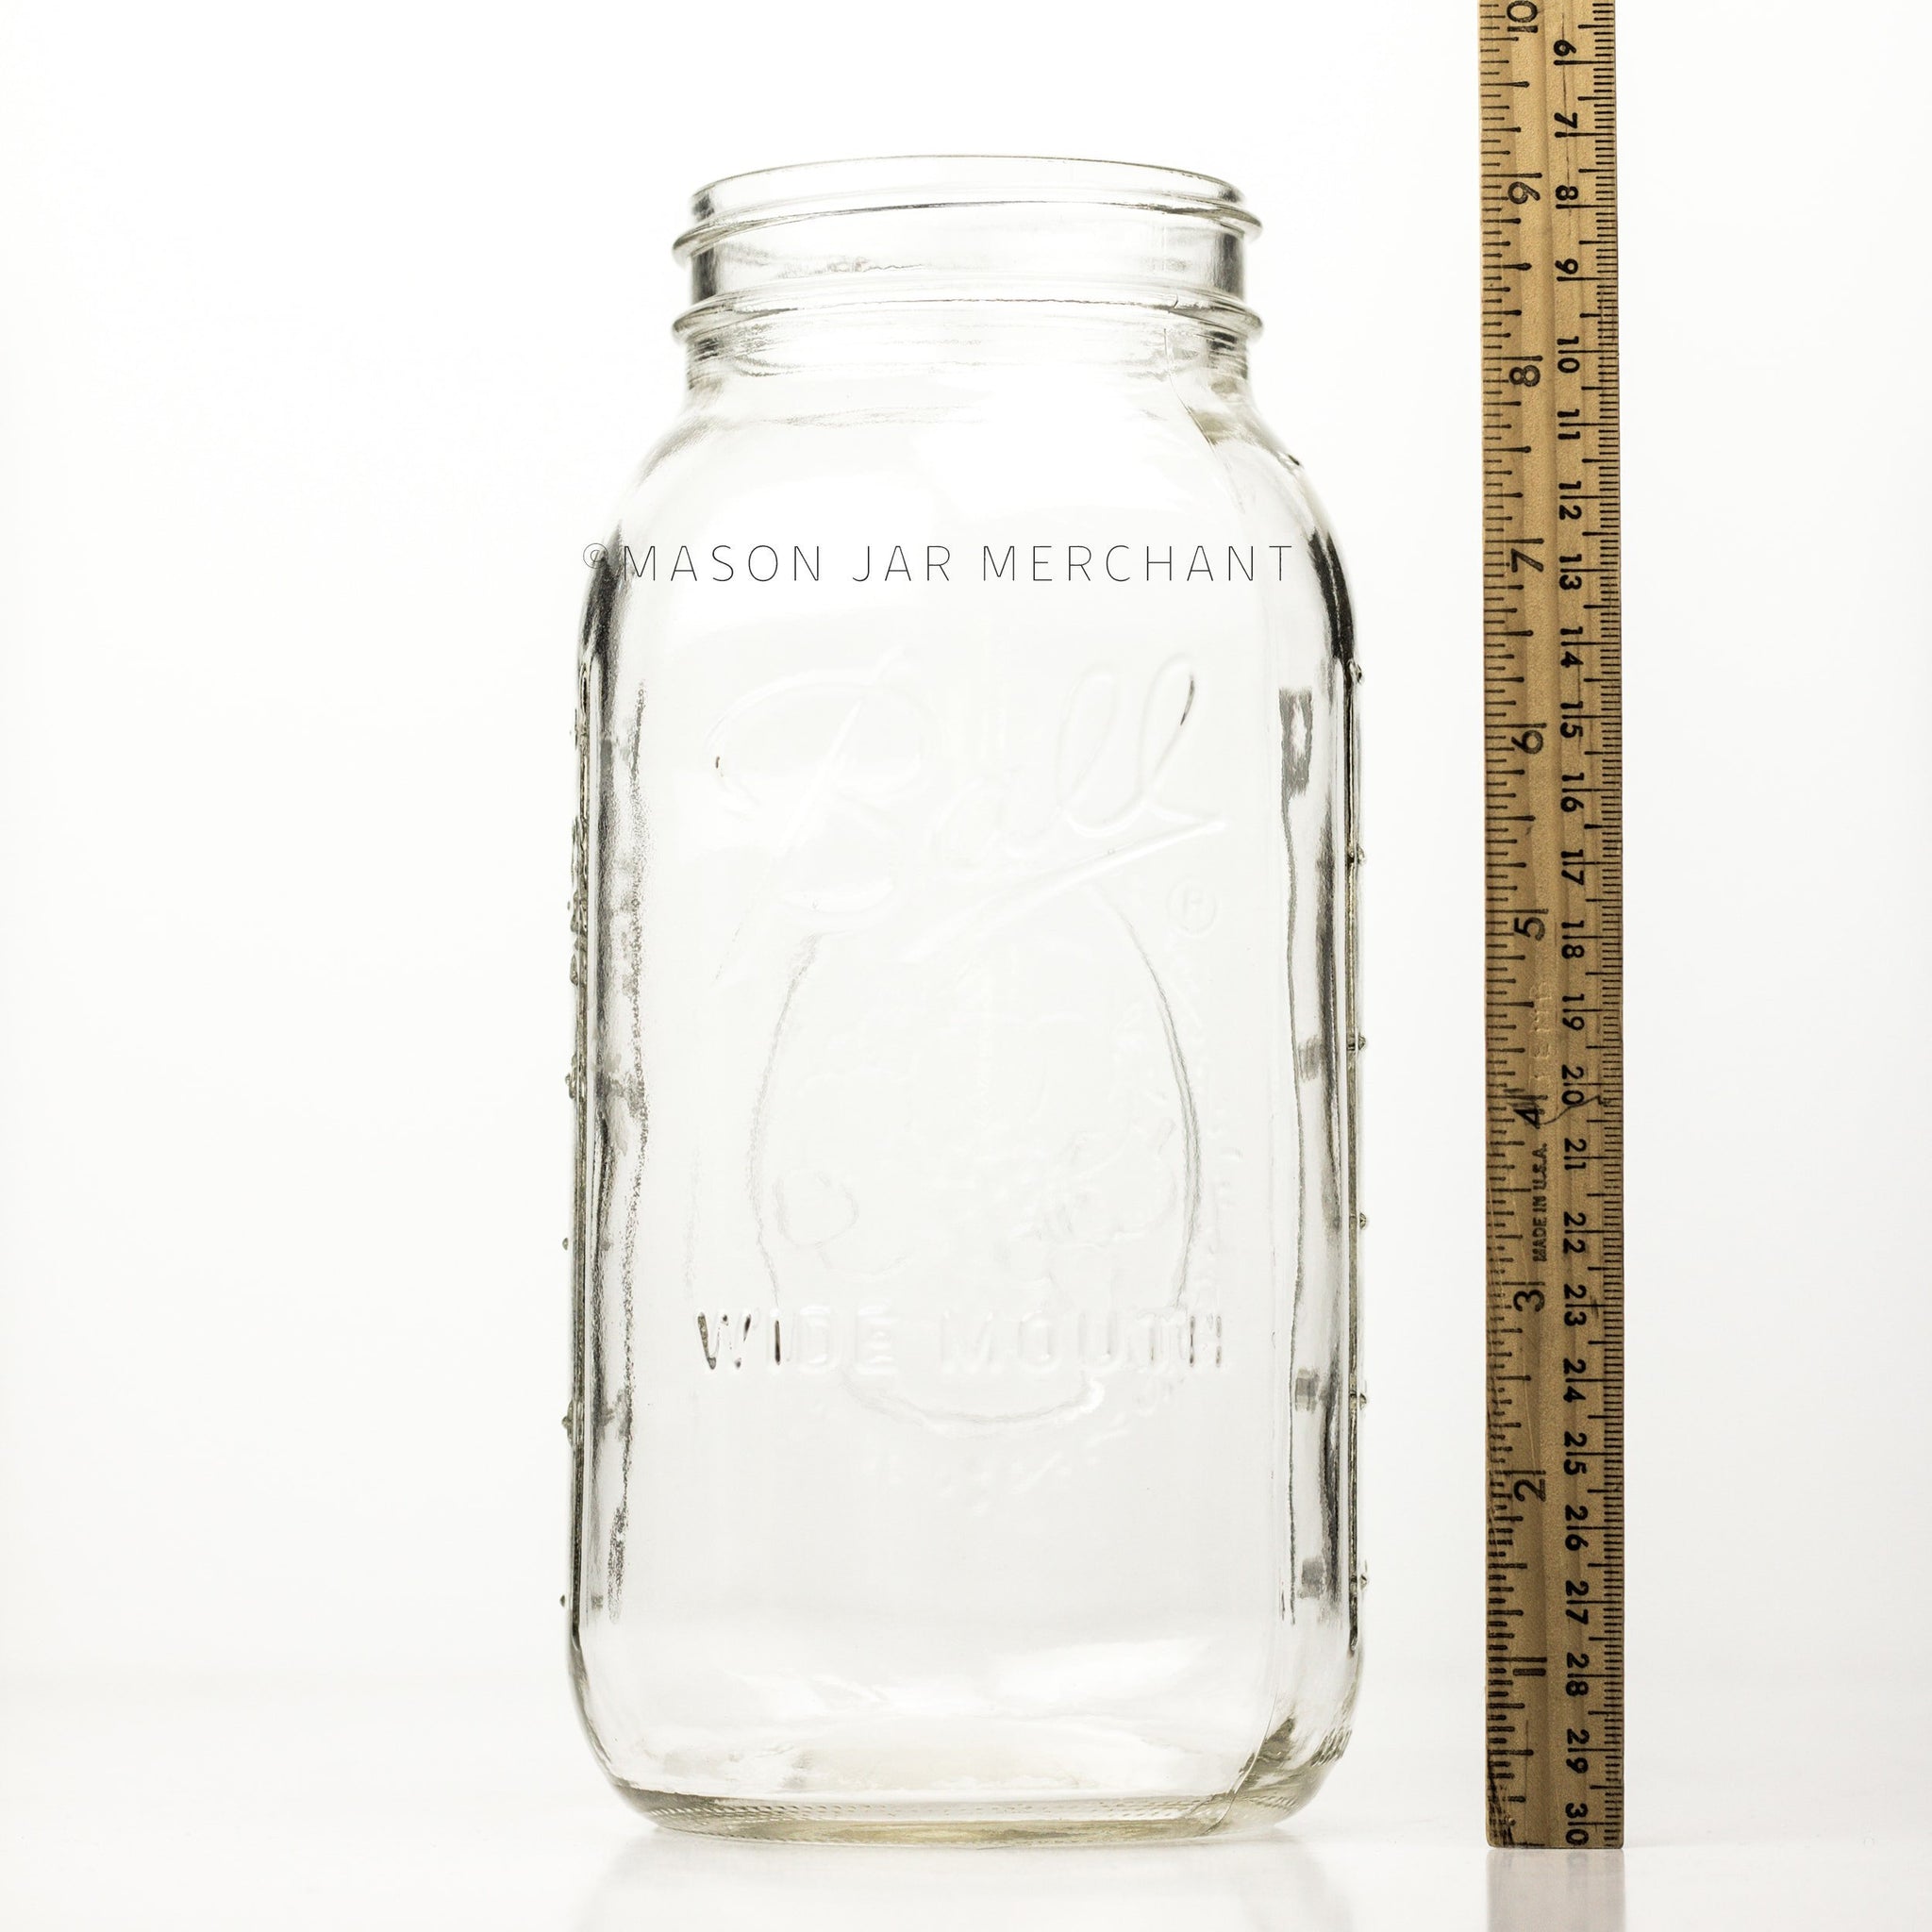 1 Gallon Glass Jar, Widemouth with Screw Lid